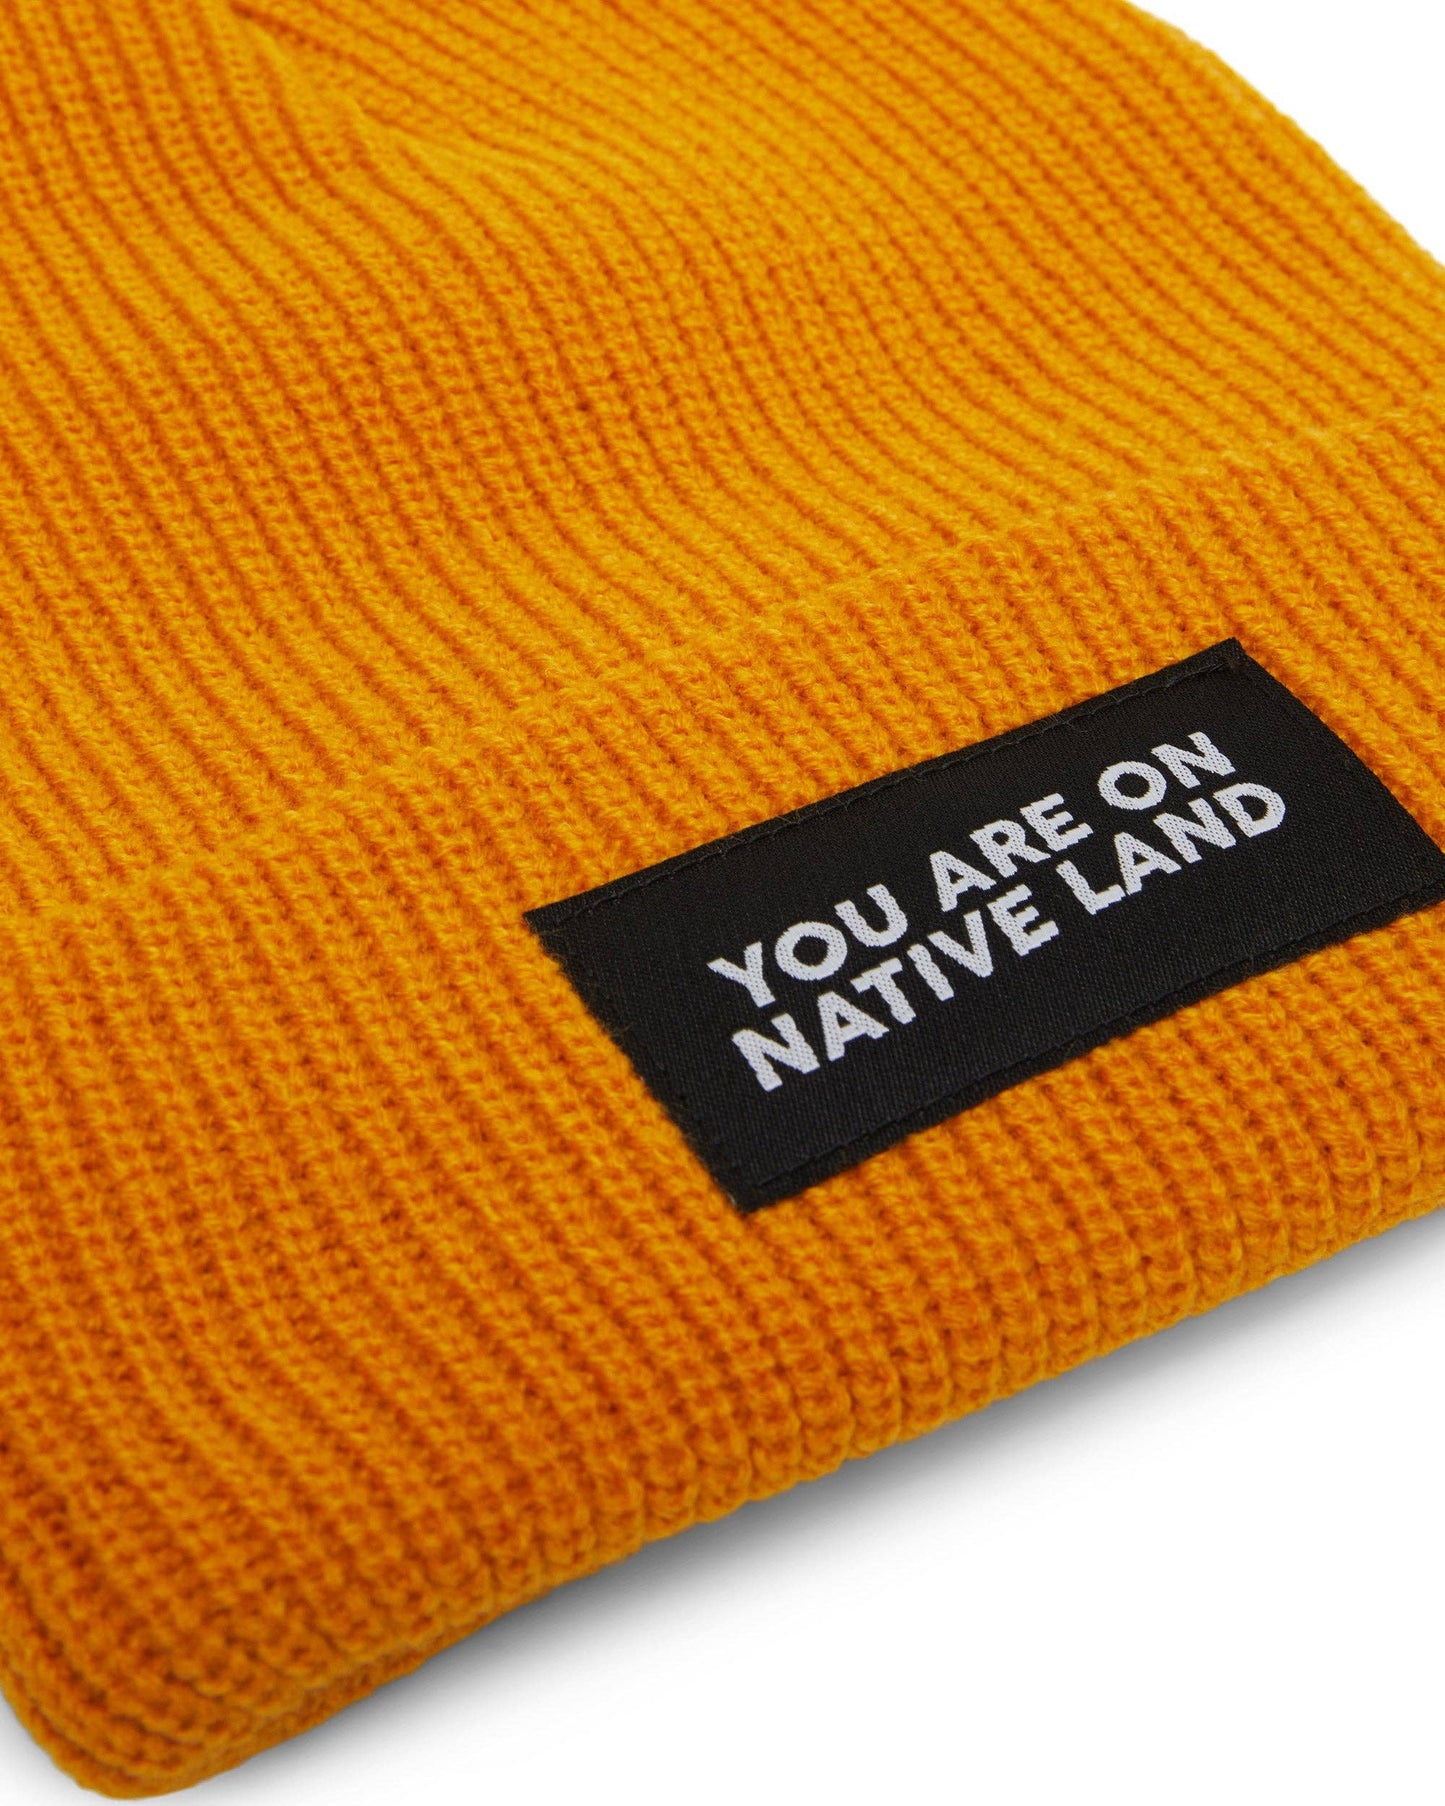 'You Are On Native Land' - Ribbed Beanie: Marigold